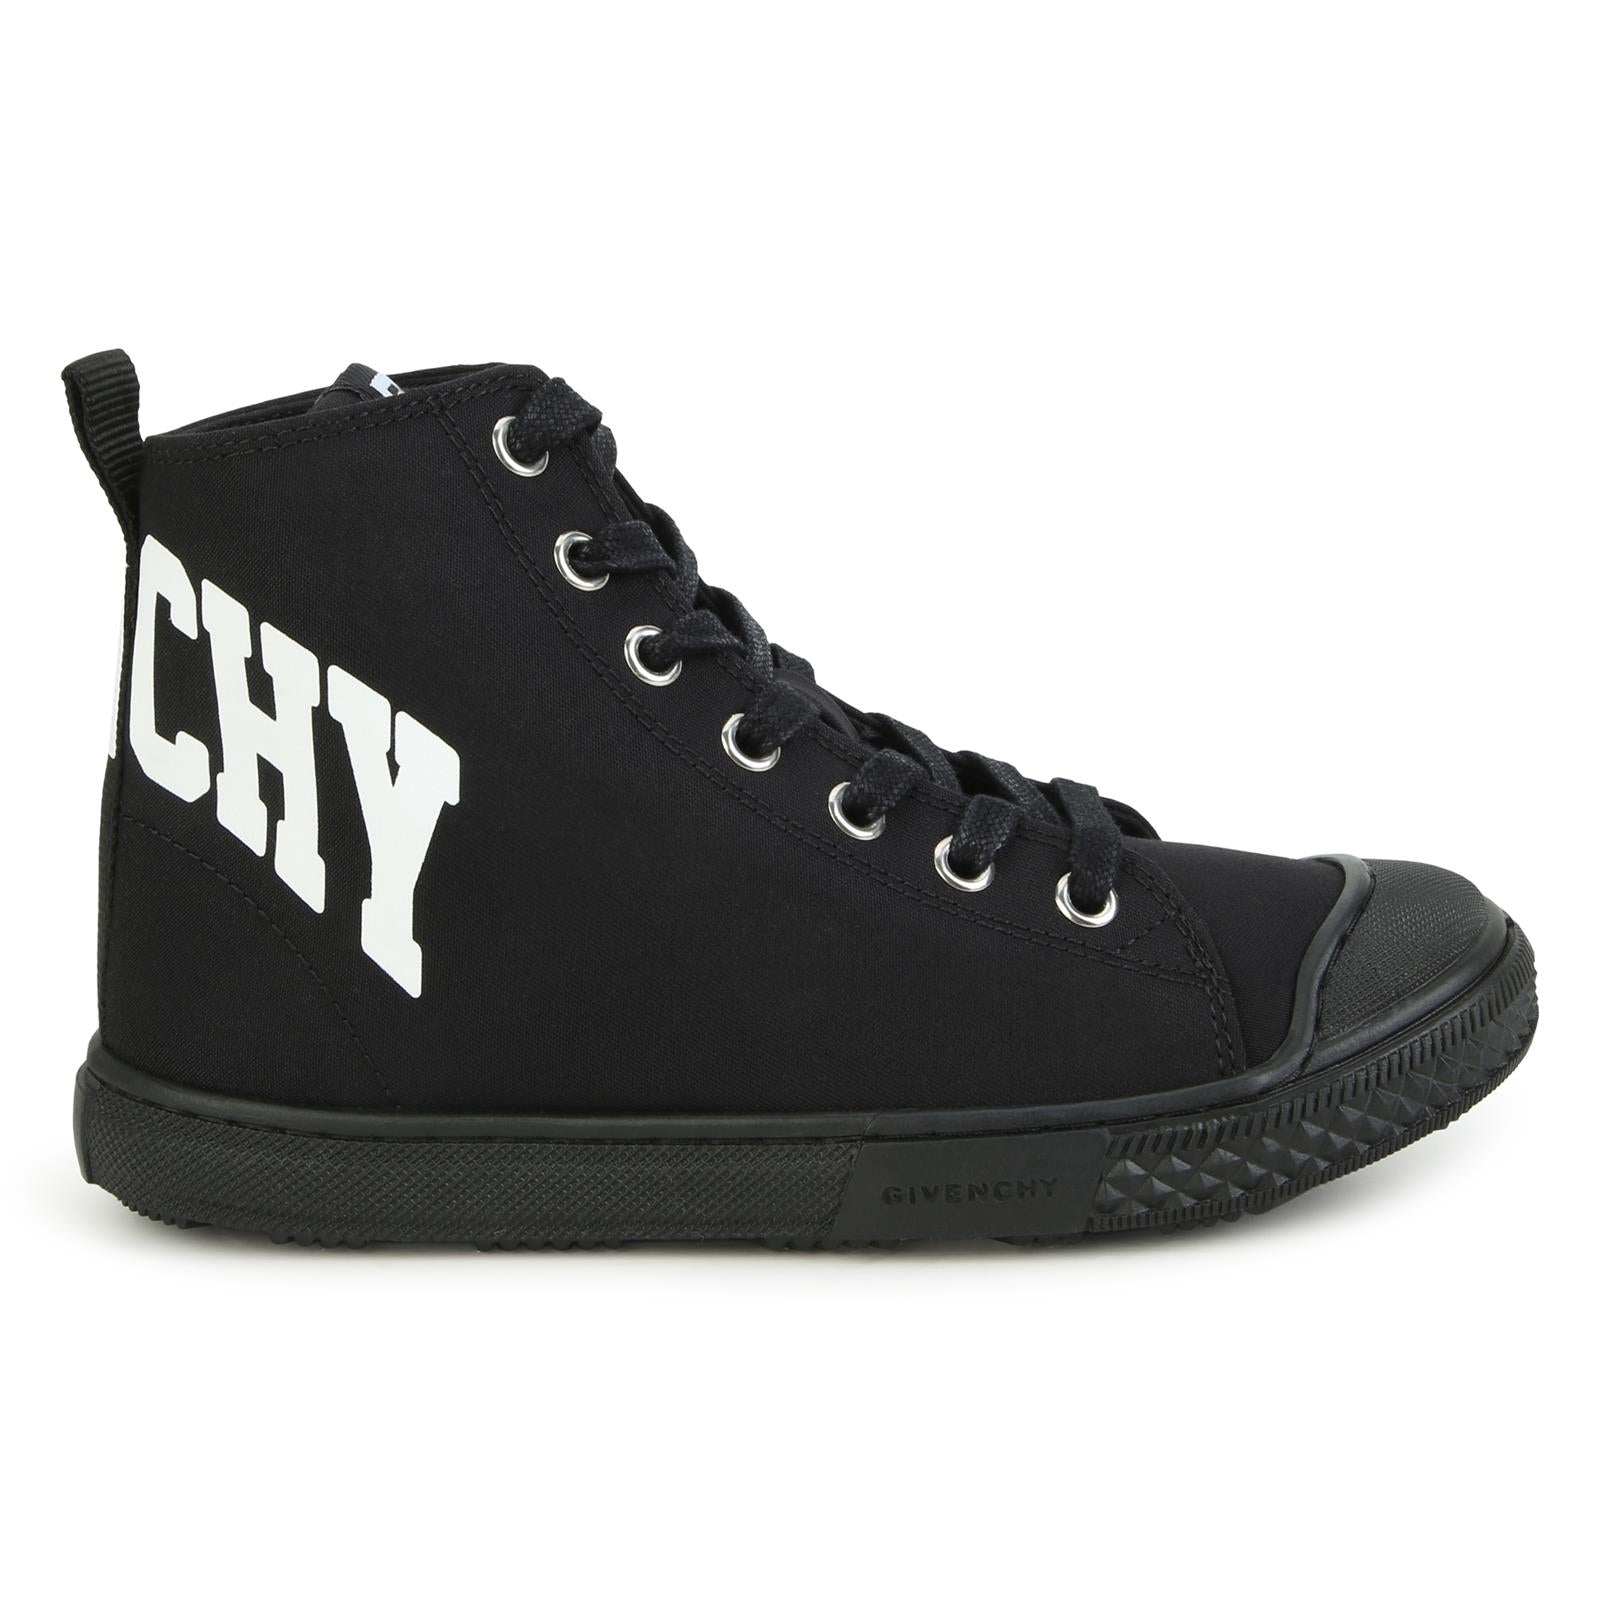 Givenchy High-Top Black Sneakers